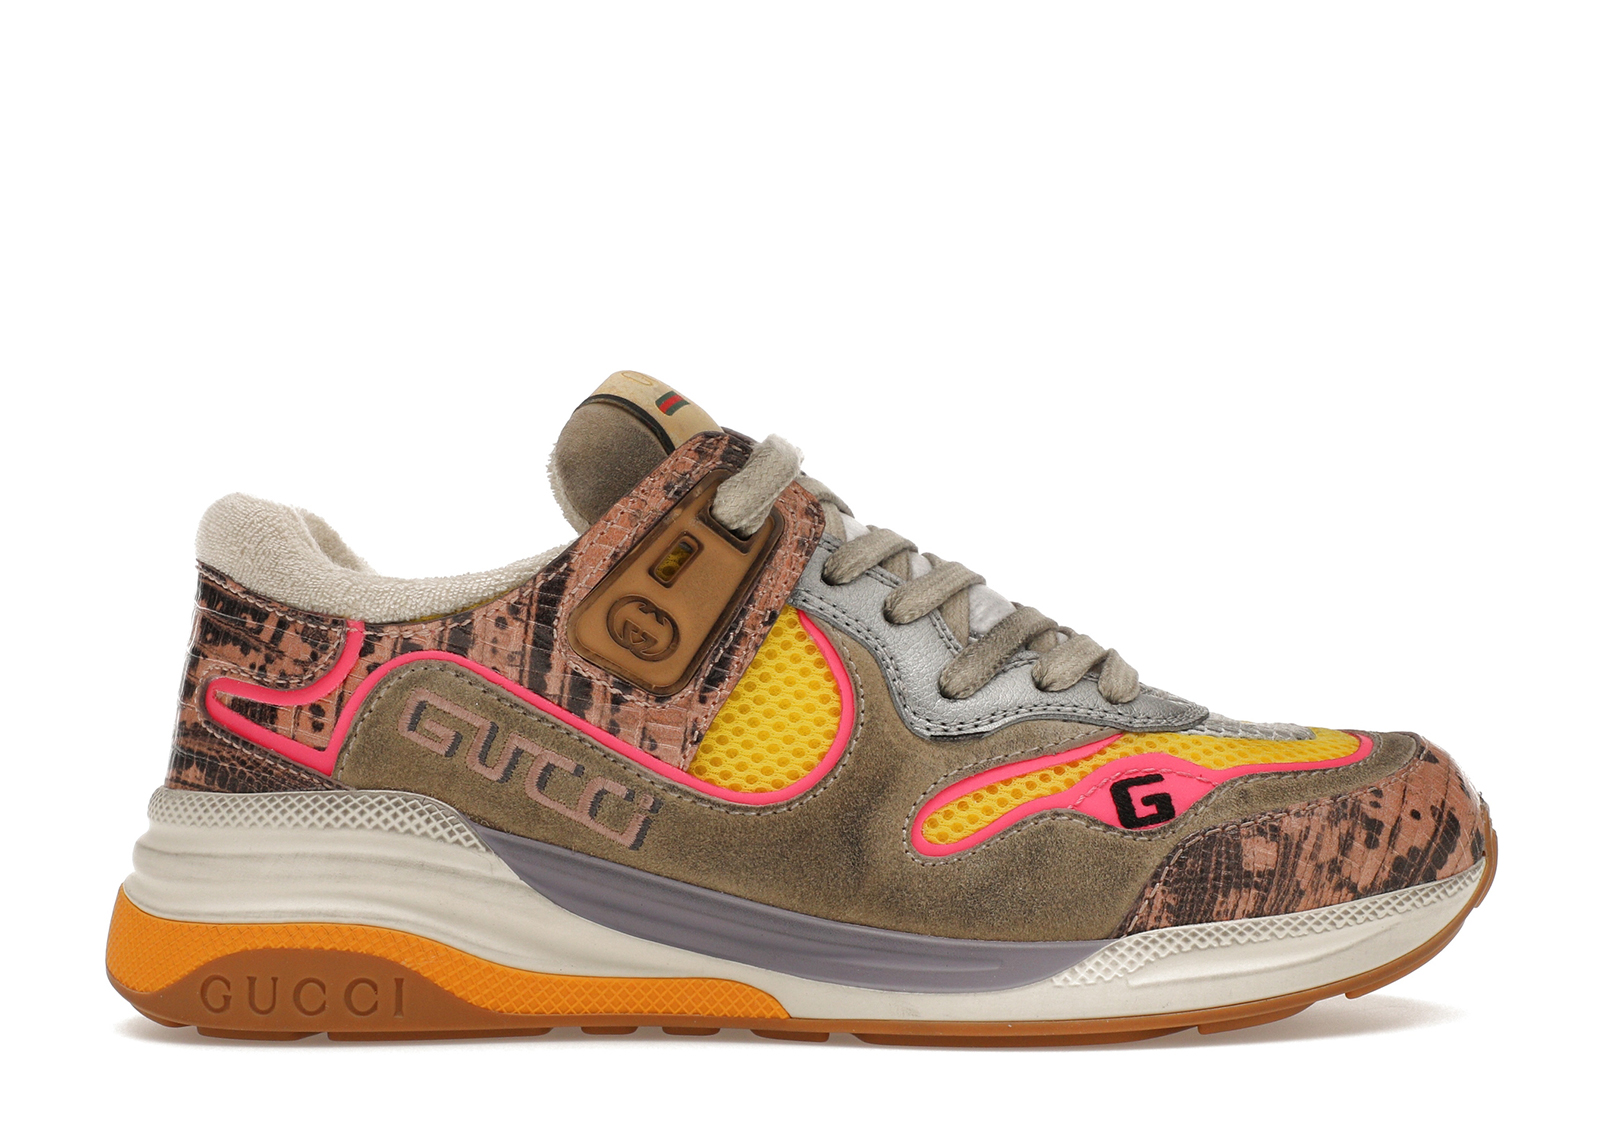 Gucci Ultrapace Pink Tejus Printed (Women's)